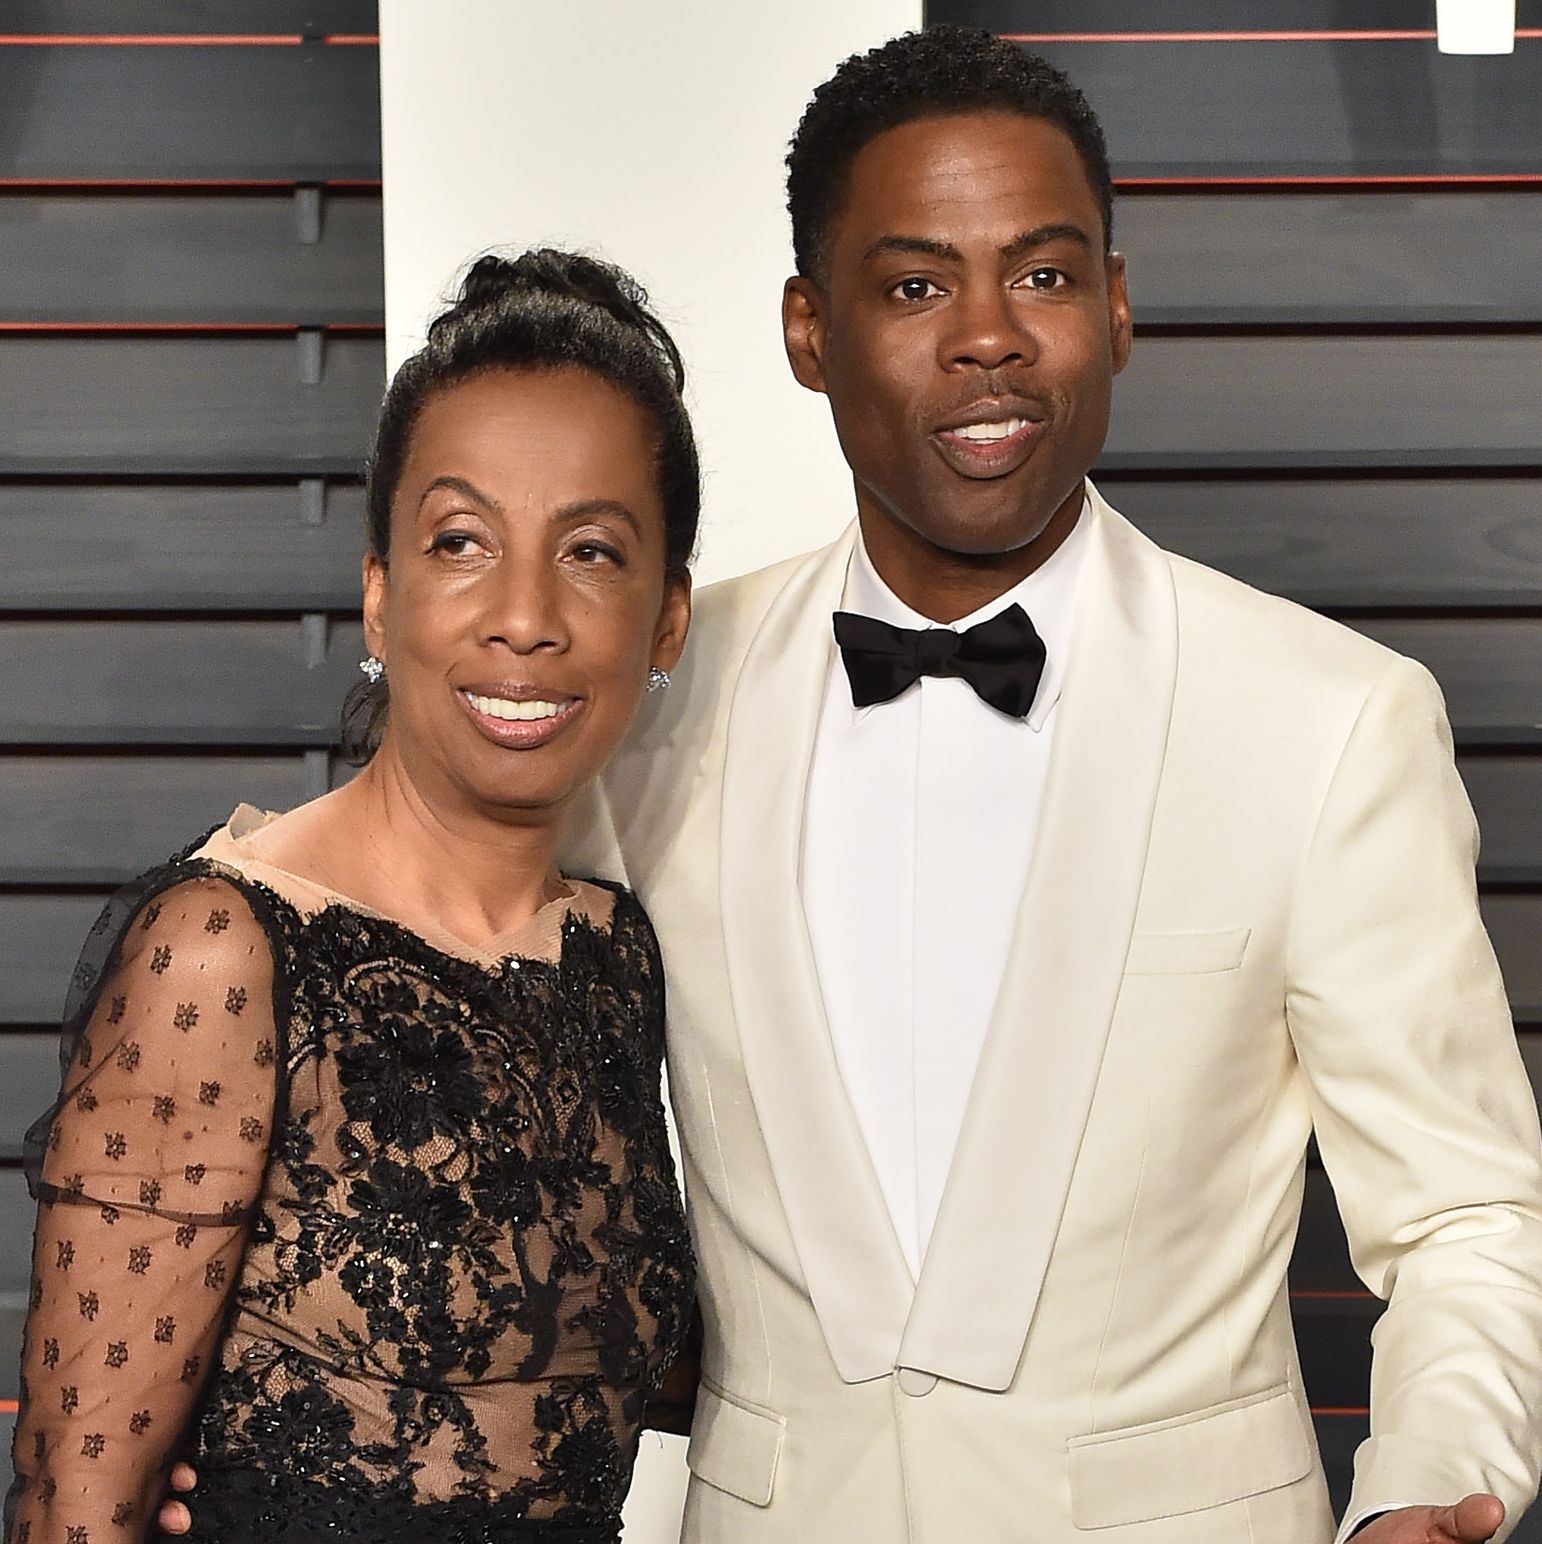 Chris Rock's Mother Just Addressed the Will Smith Oscar Slap